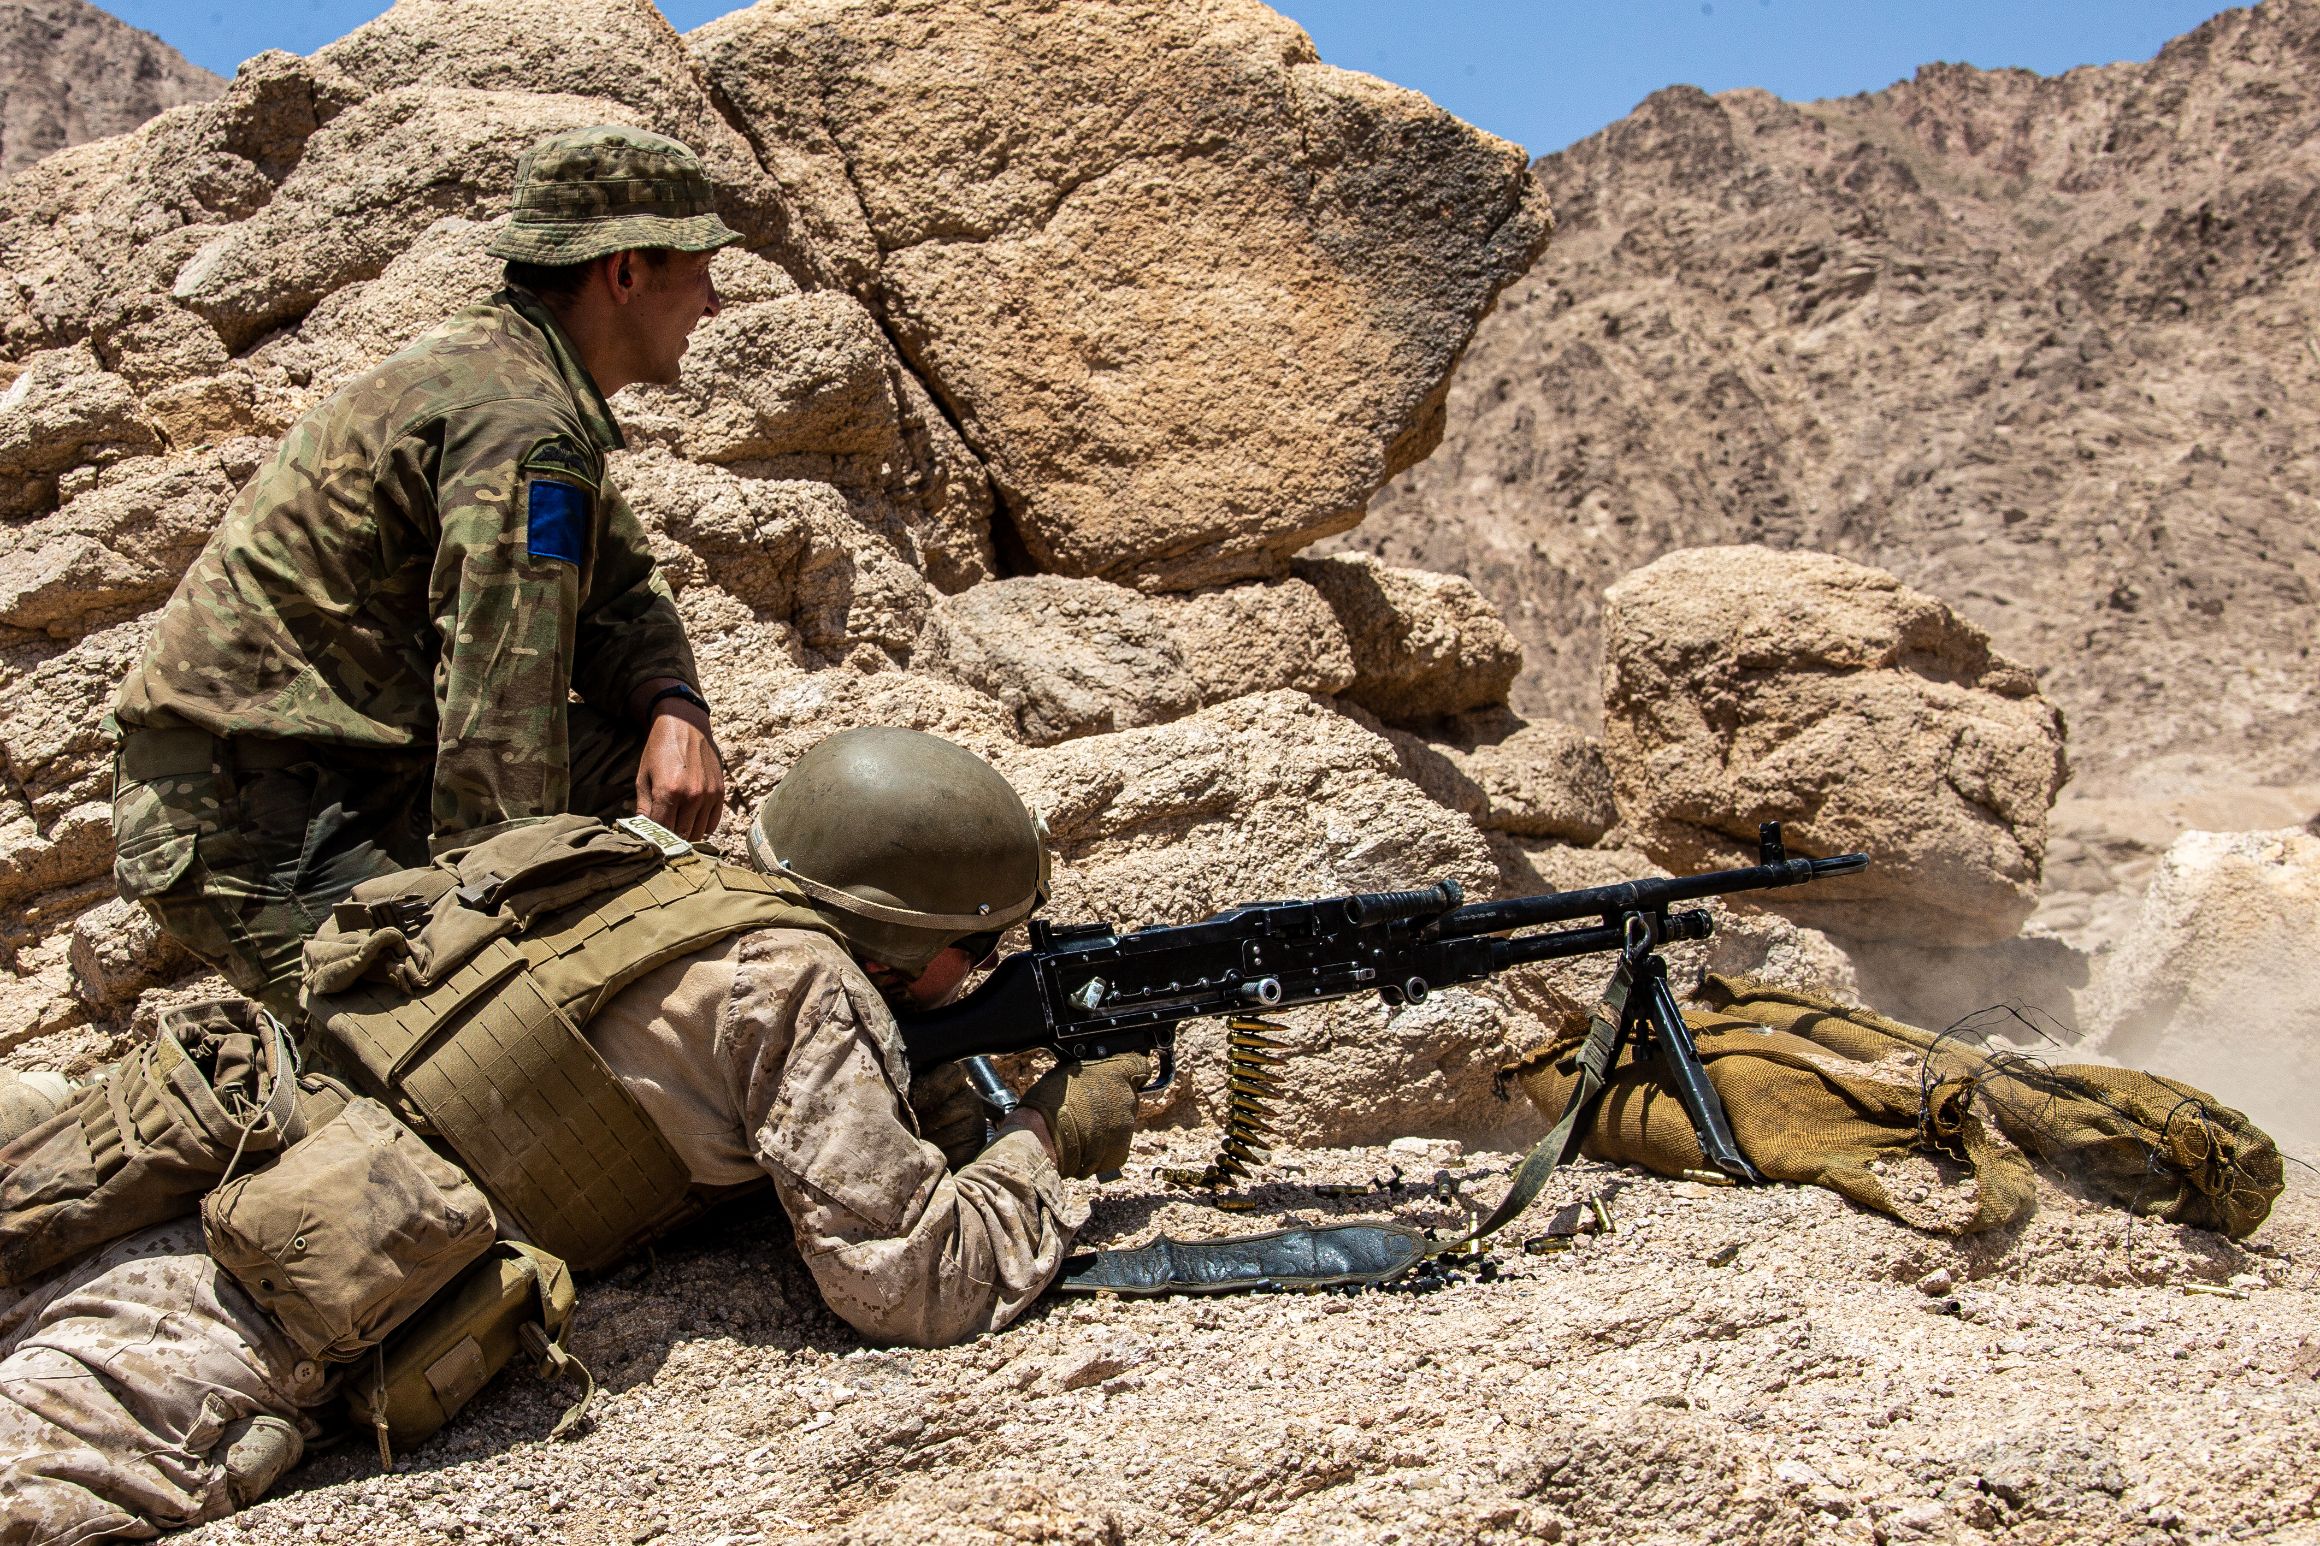 A U.S. Marine with 2nd Battalion, 1st Marines, attached to the Special Purpose Marine Air – Ground Task Force – Crisis Response - Central Command (SPMAGTF-CR-CC) 21.1, fires a L7A2 General Purpose Machine Gun while being observed by a British Army Soldier with 2nd Battalion, Parachute Regiment